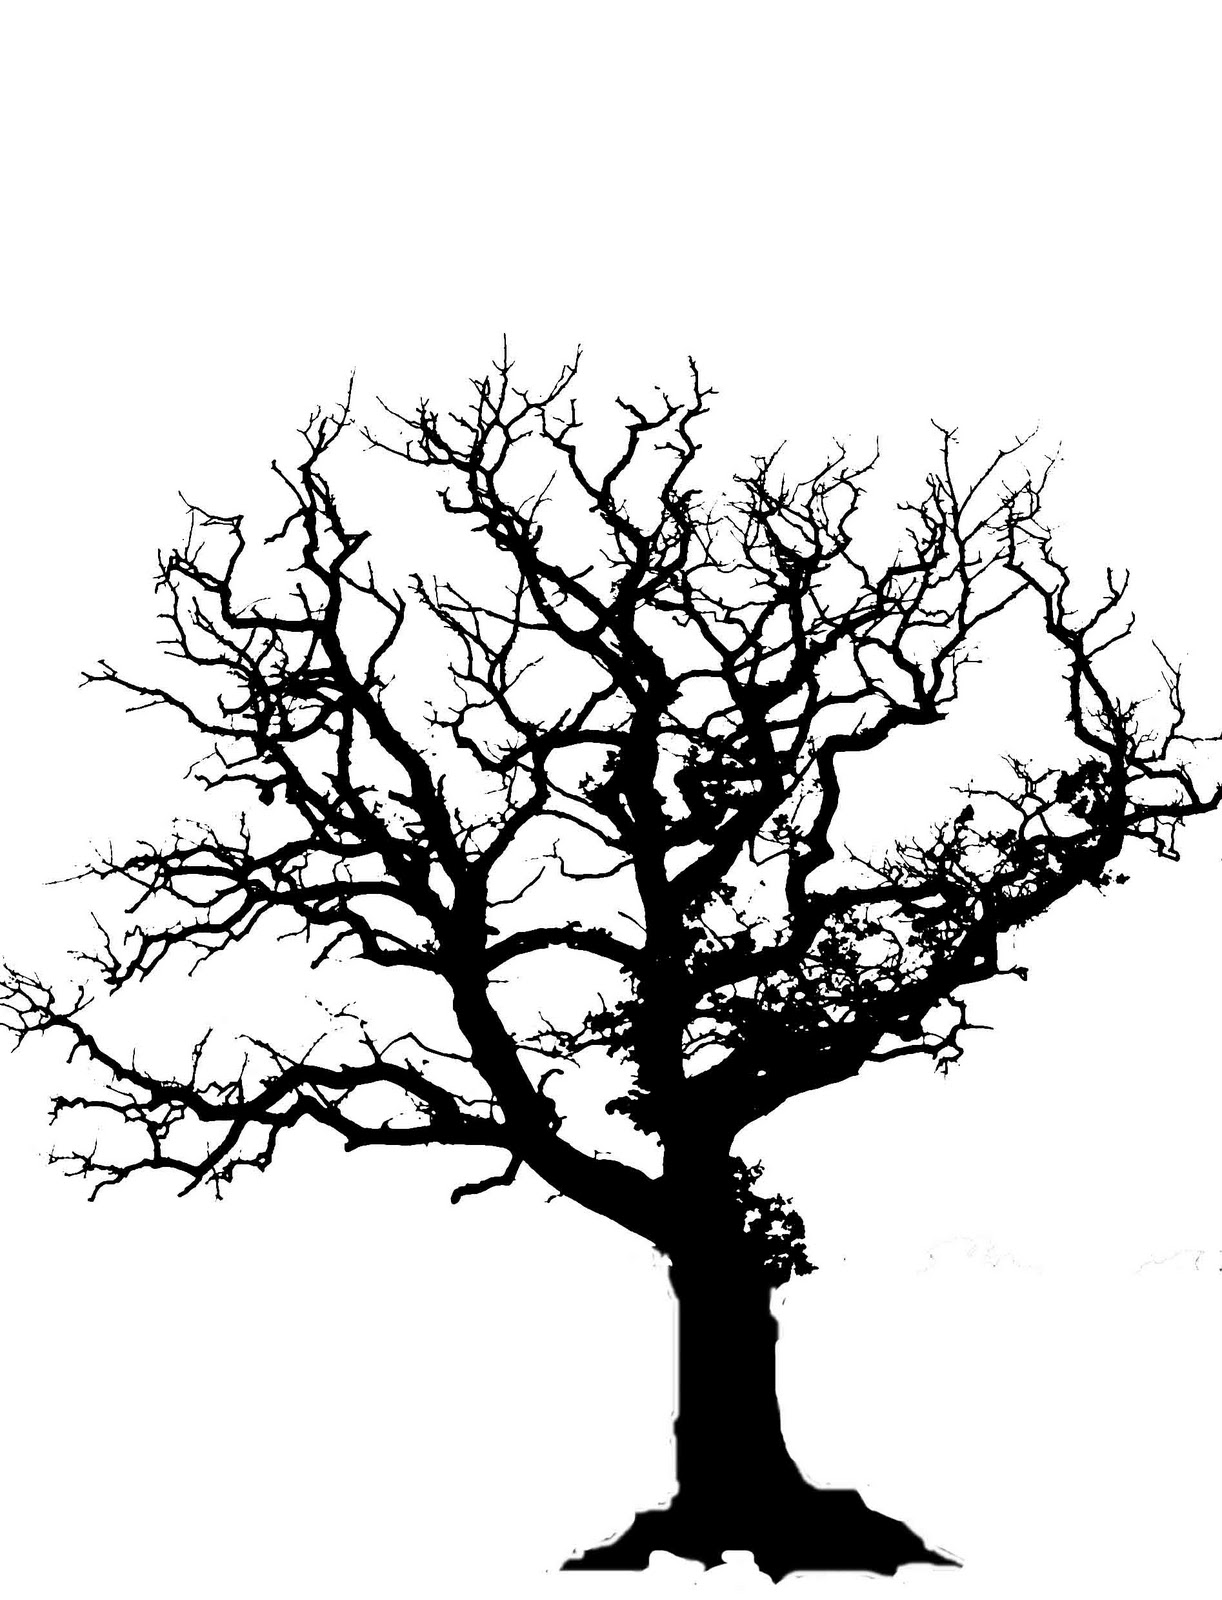 Oak Tree Silhouette With Roots   Clipart Panda   Free Clipart Images